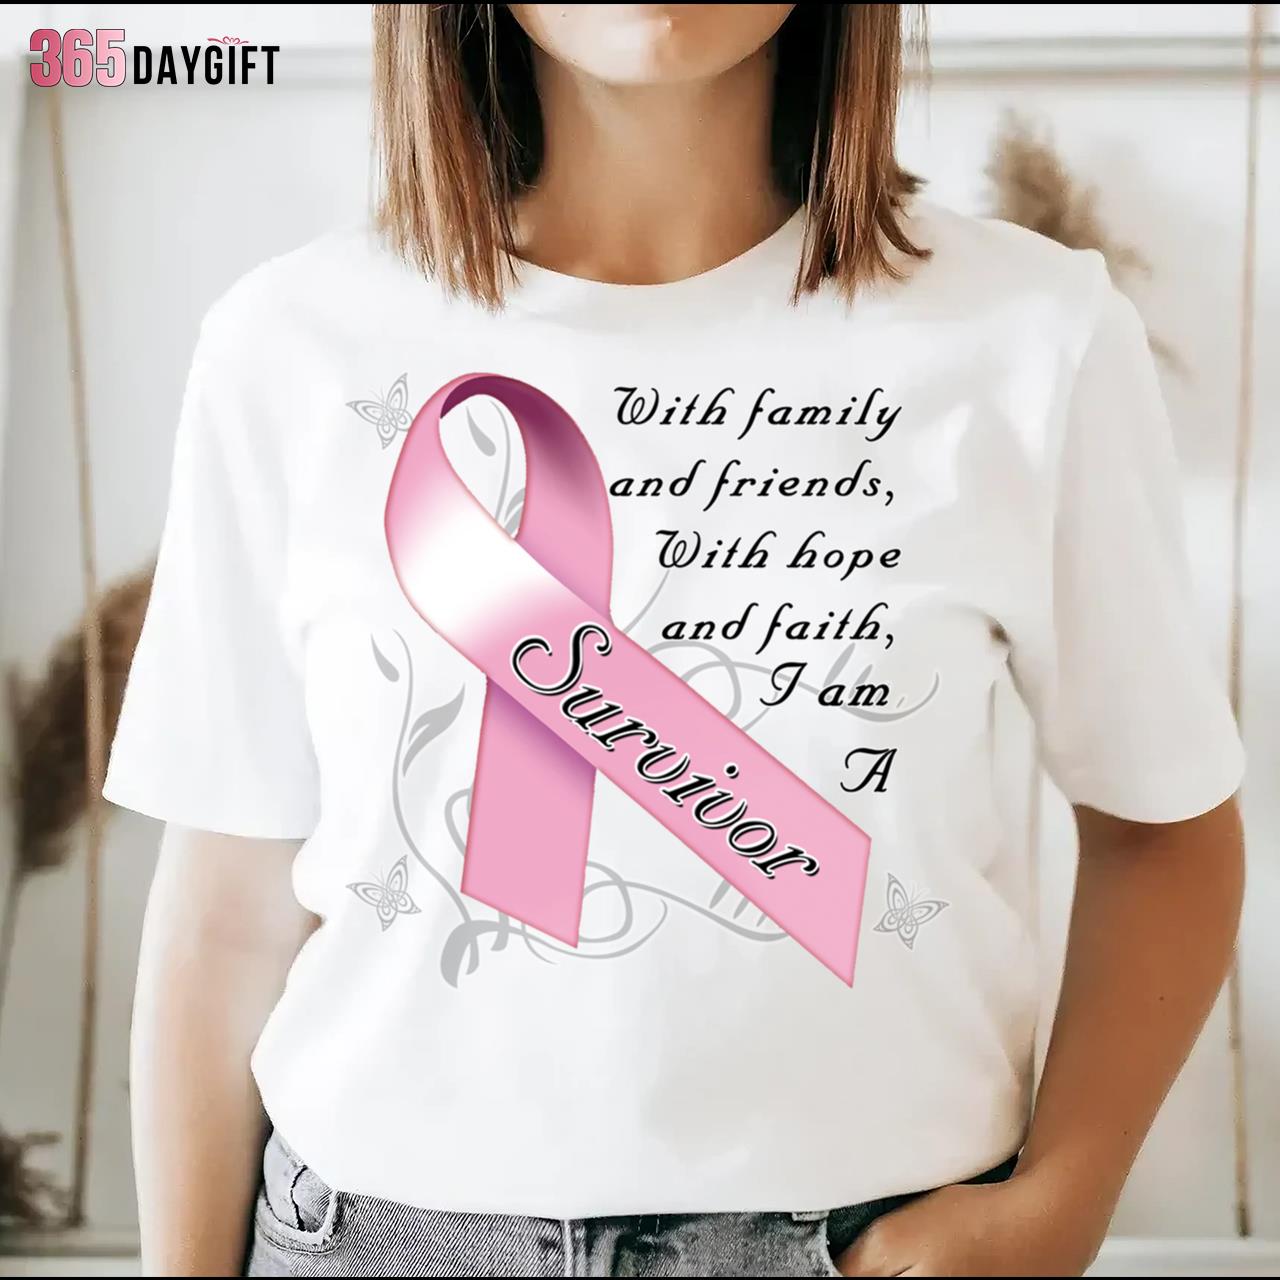 Breast Cancer Awareness Shirts With Family And Friend Will Hope And Faith